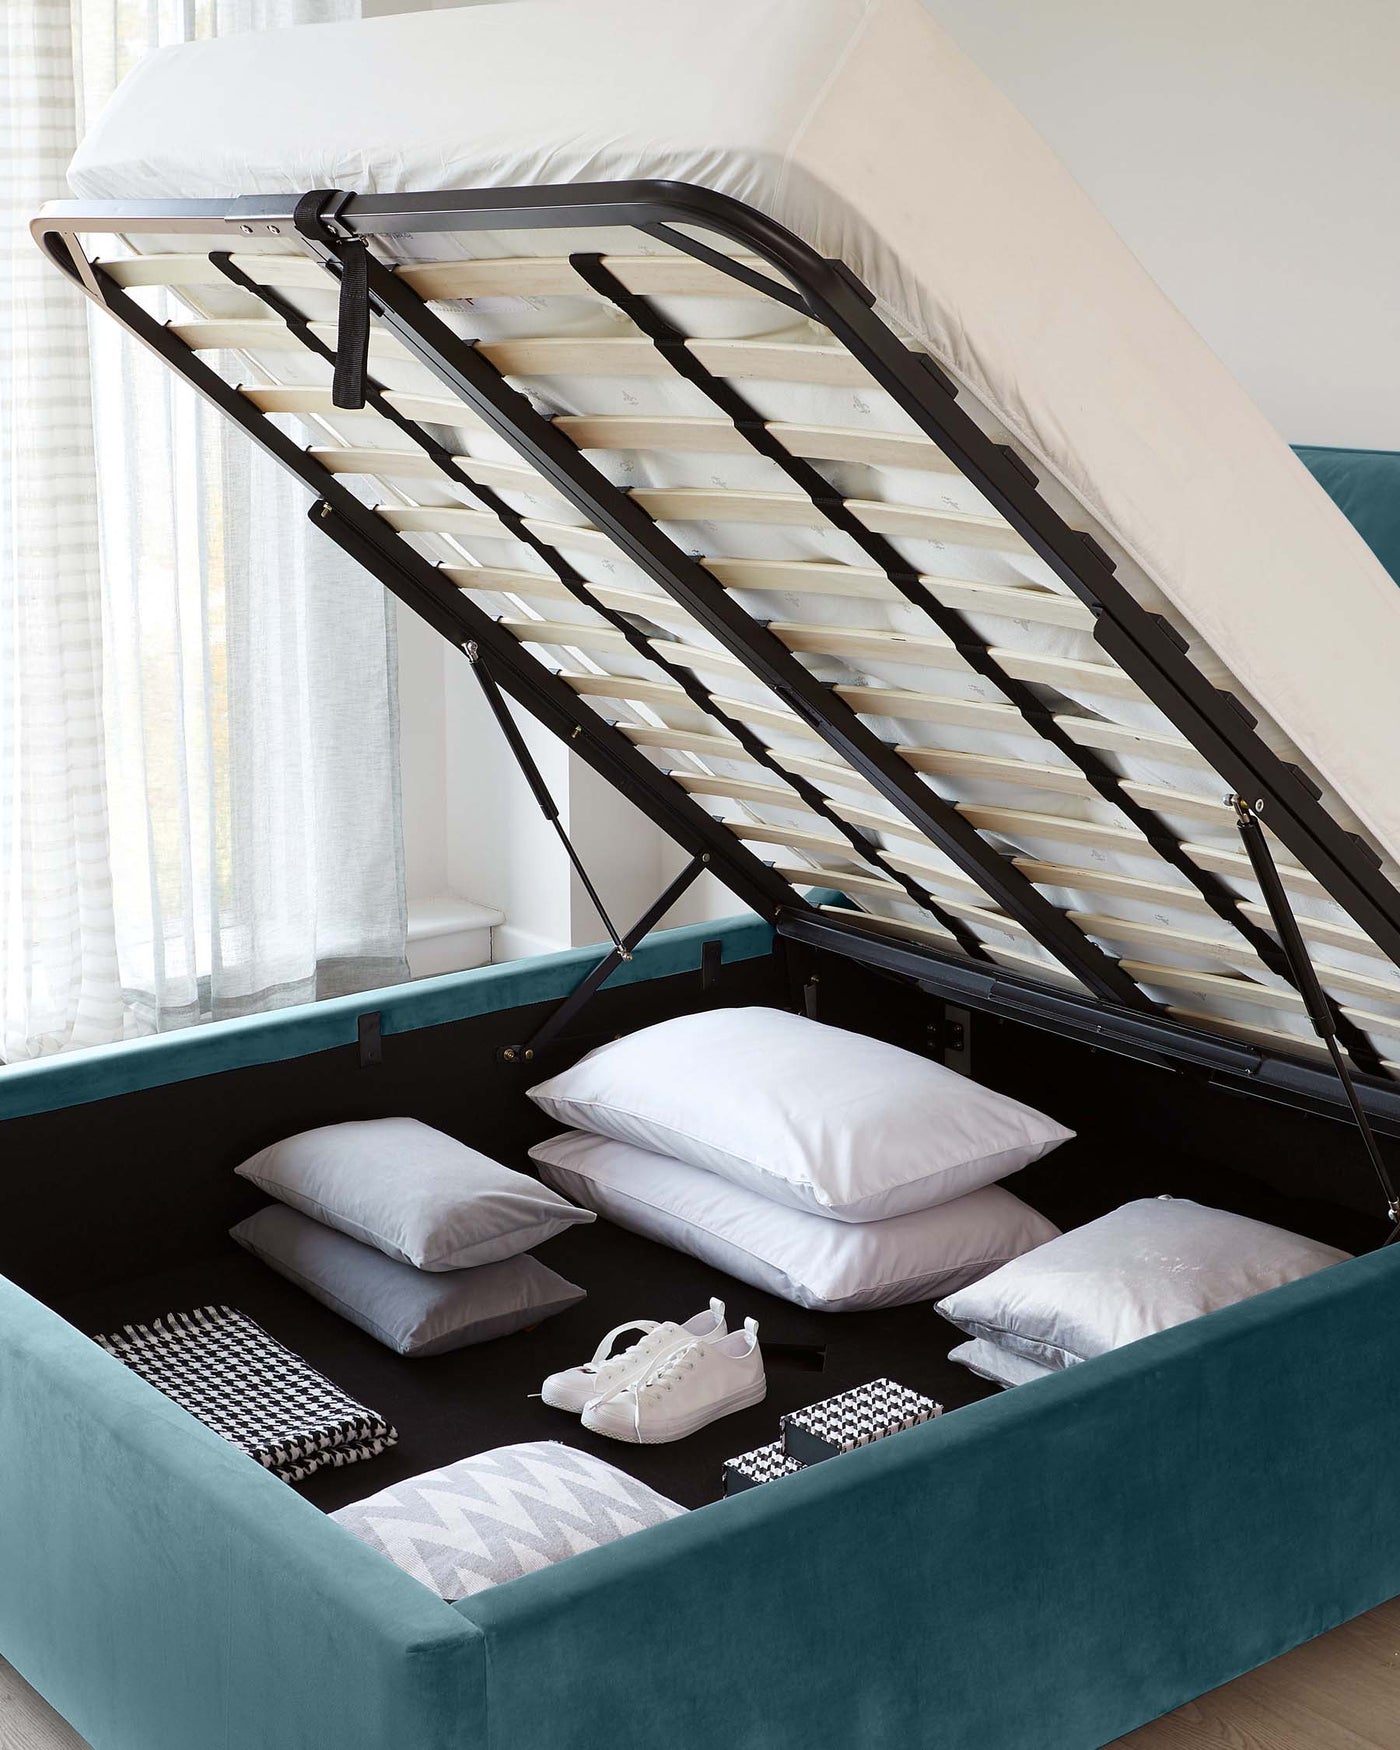 A contemporary teal upholstered storage bed with an open lift-up frame revealing a spacious compartment, fitted with a wooden slatted base and surrounded by soft pillows and personal items for a homely touch.